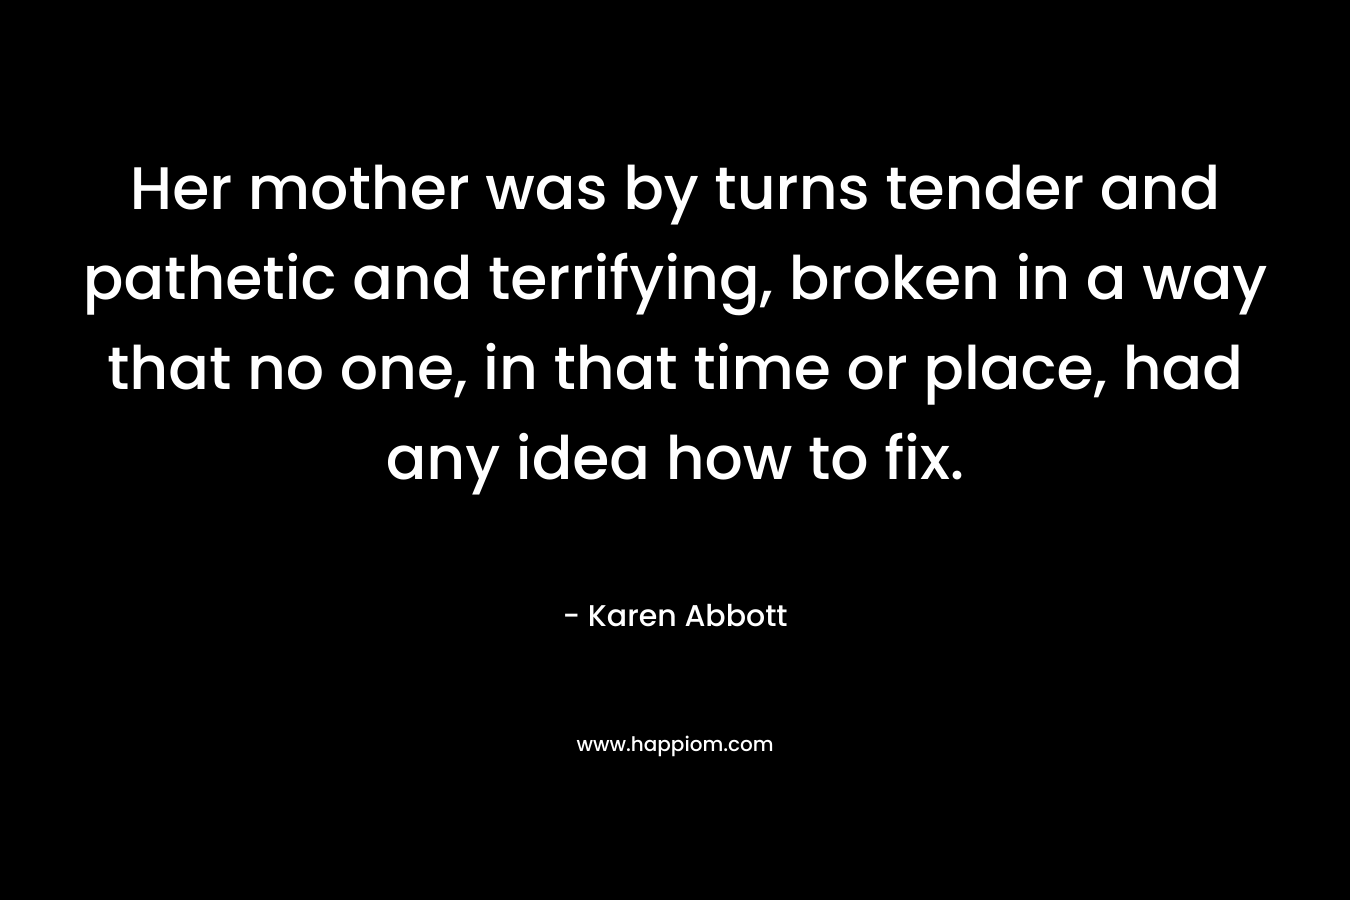 Her mother was by turns tender and pathetic and terrifying, broken in a way that no one, in that time or place, had any idea how to fix. – Karen Abbott